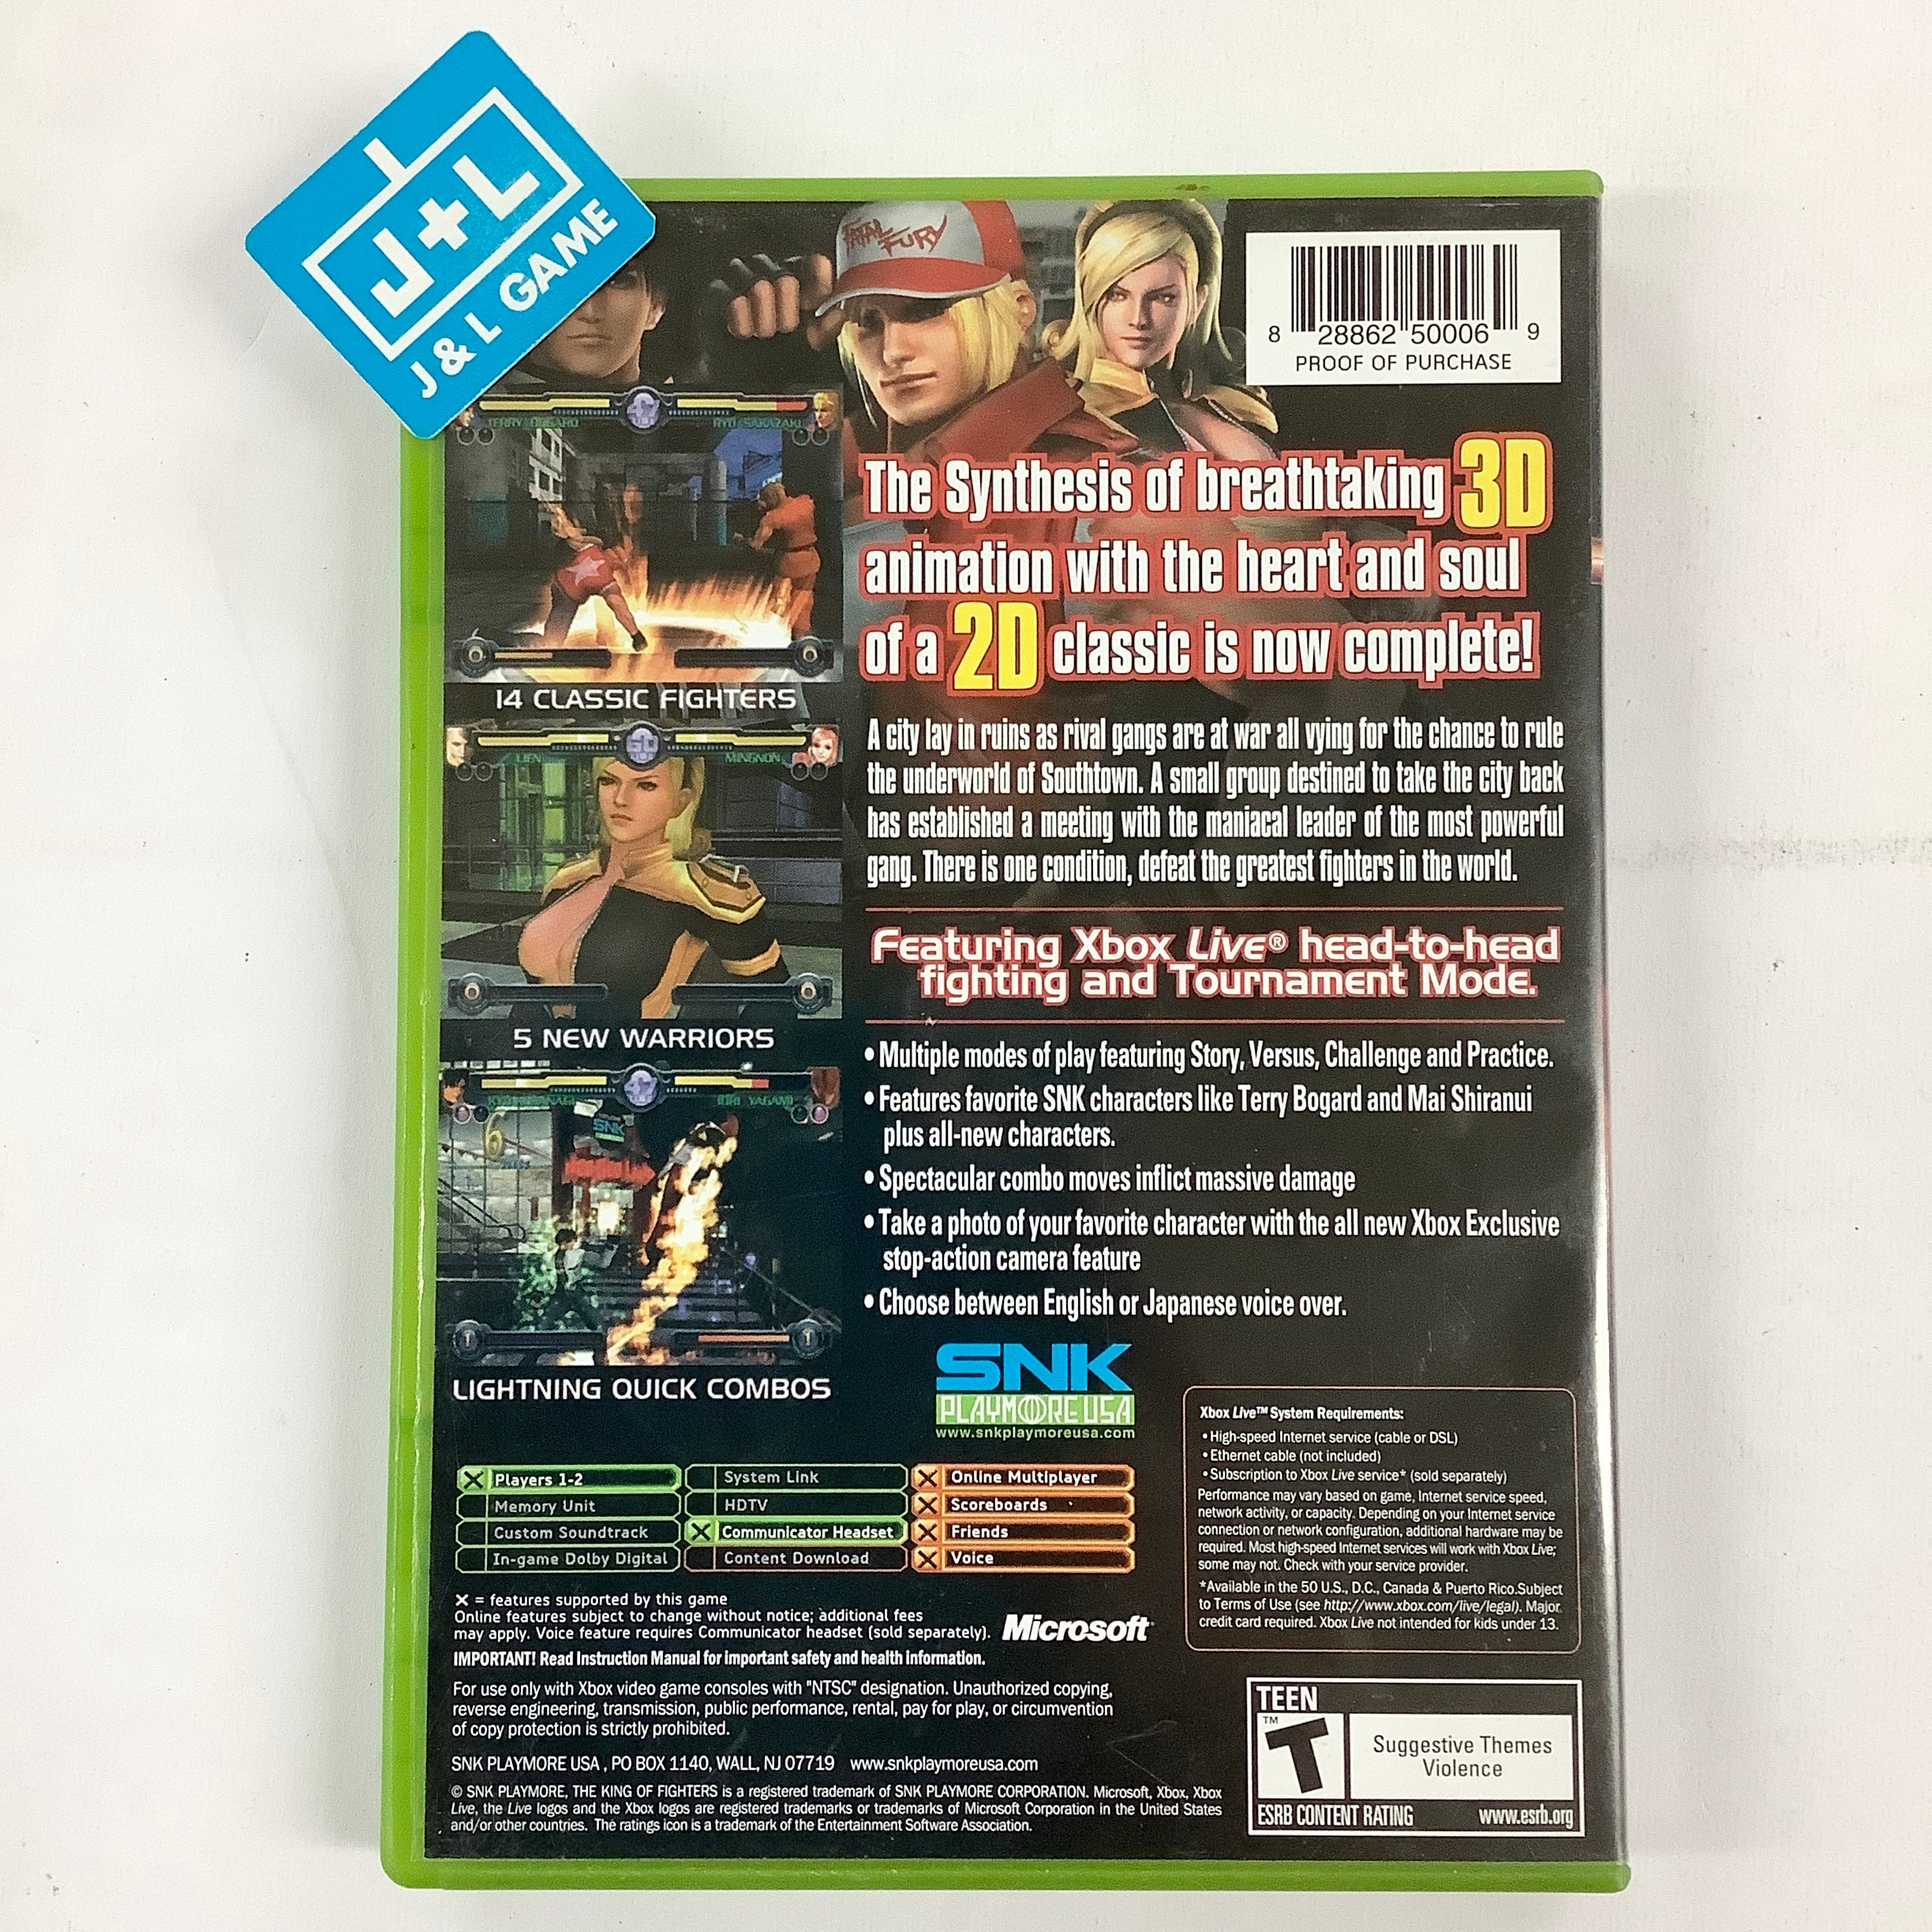 The King of Fighters: Maximum Impact Maniax - (XB) Xbox [Pre-Owned] Video Games SNK Playmore   